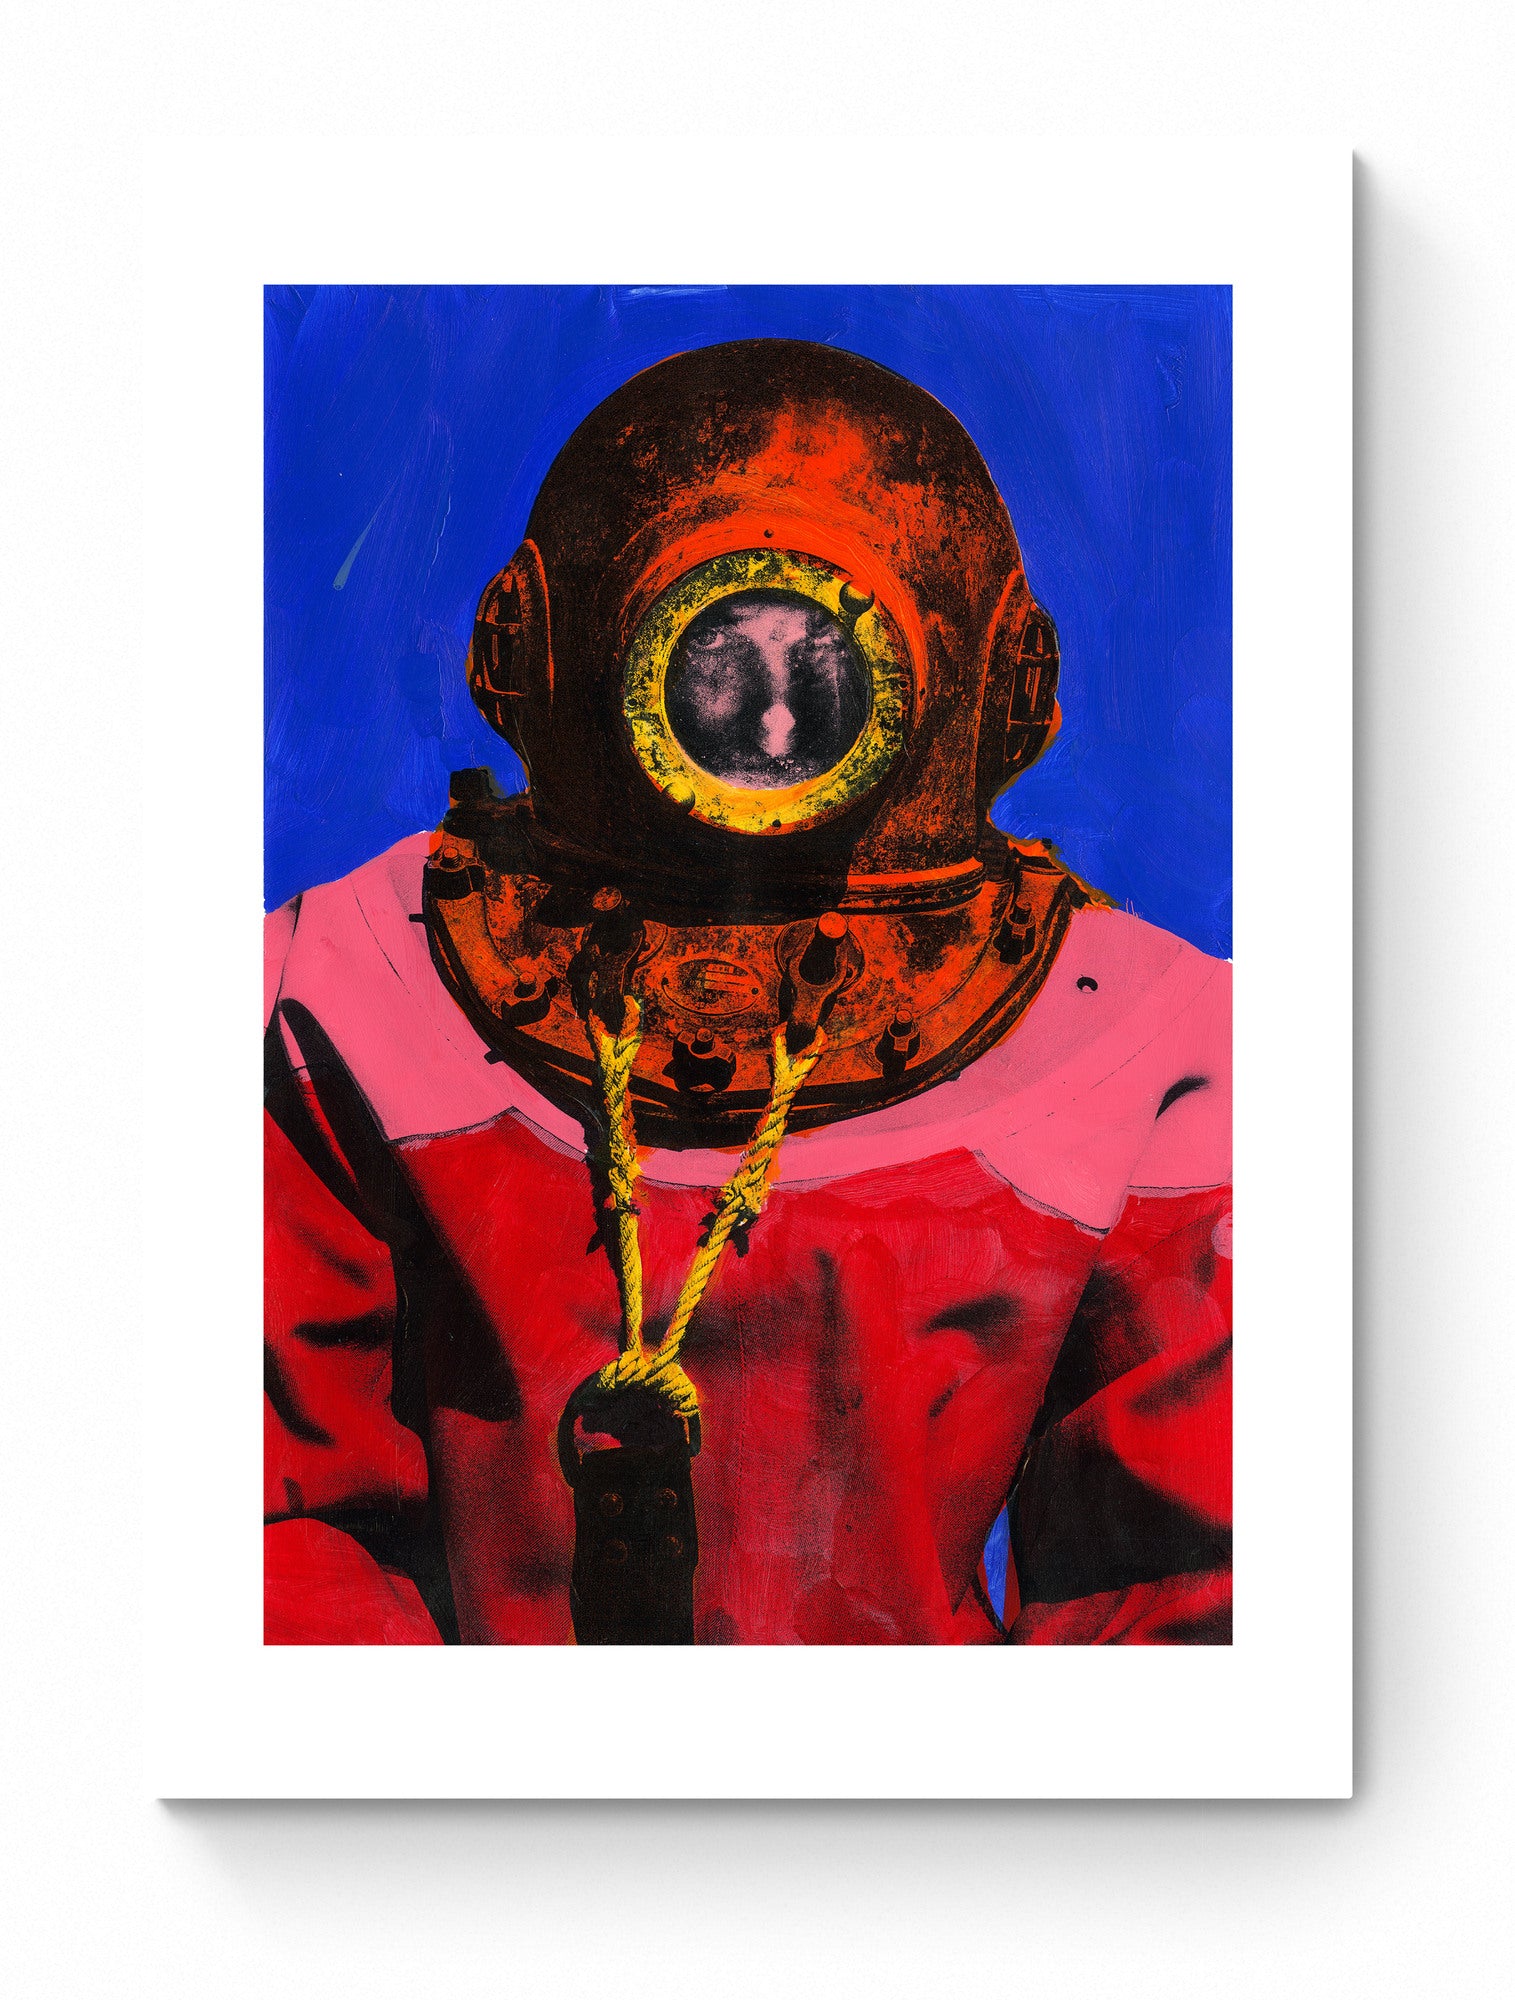 Painting Pop Art Wall Art from Greece | Royal Blue sponge diver from Kalymnos island, by George Tatakis - poster